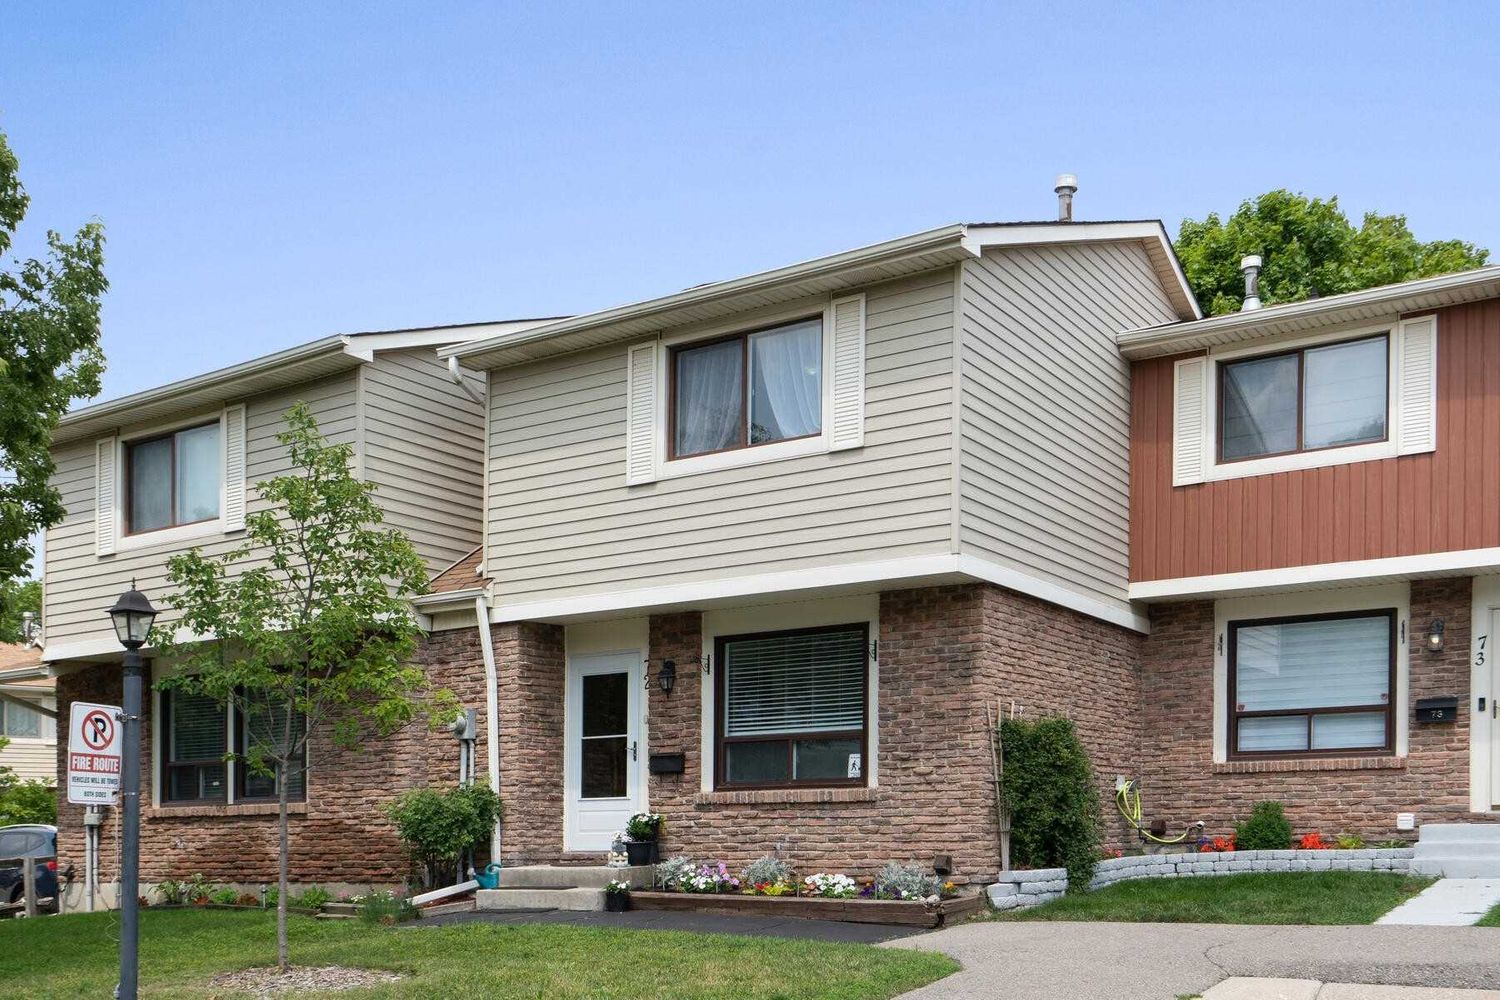 98 Falconer Drive. 98 Falconer Drive Townhomes is located in  Mississauga, Toronto - image #1 of 2